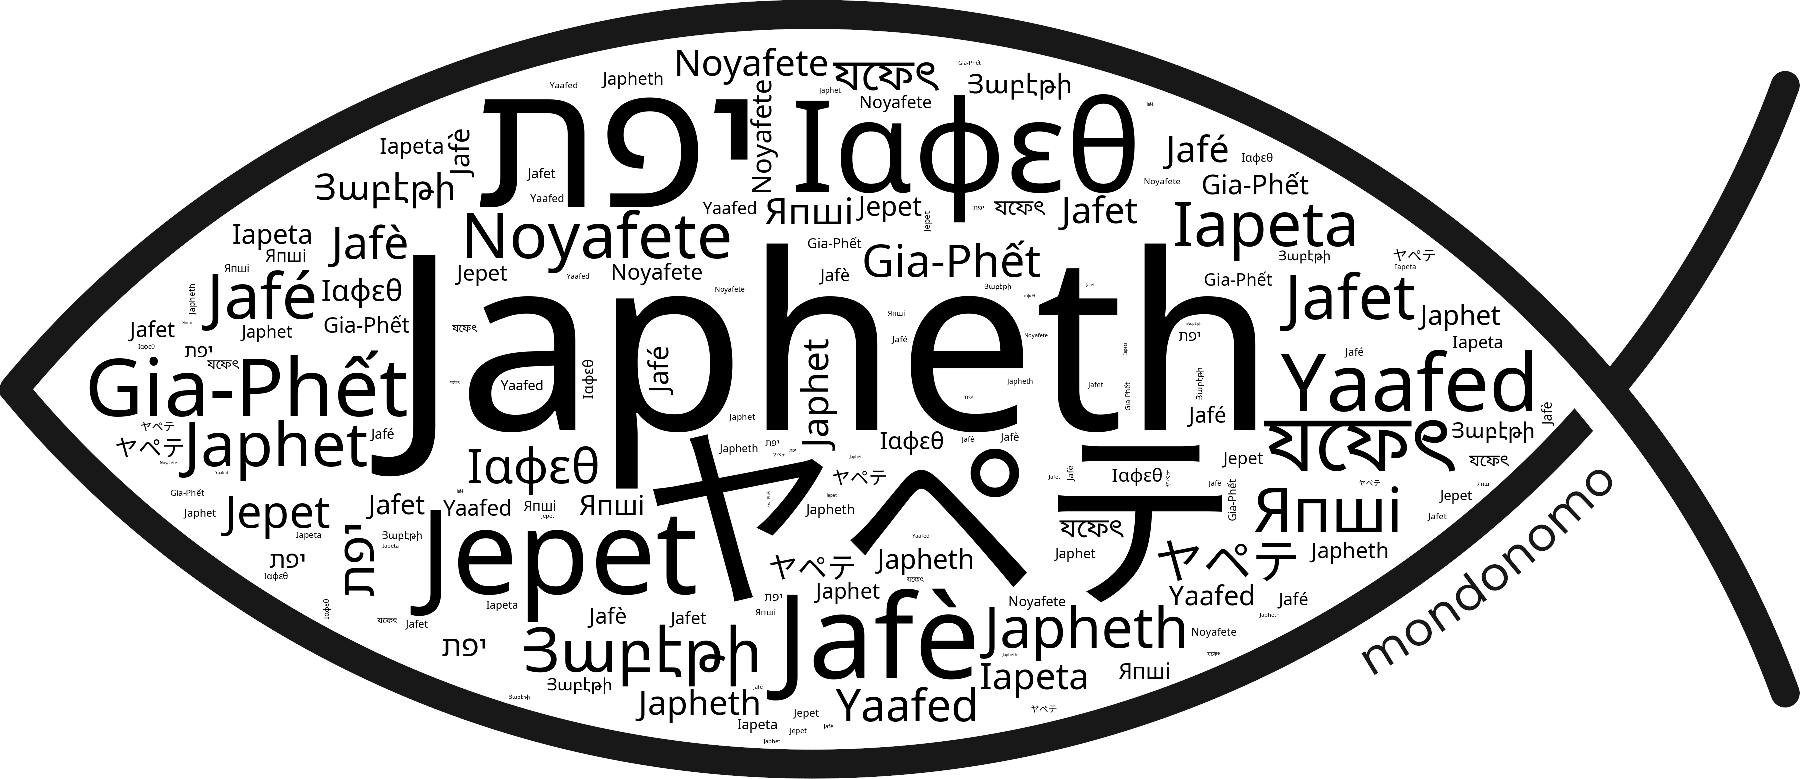 Name Japheth in the world's Bibles